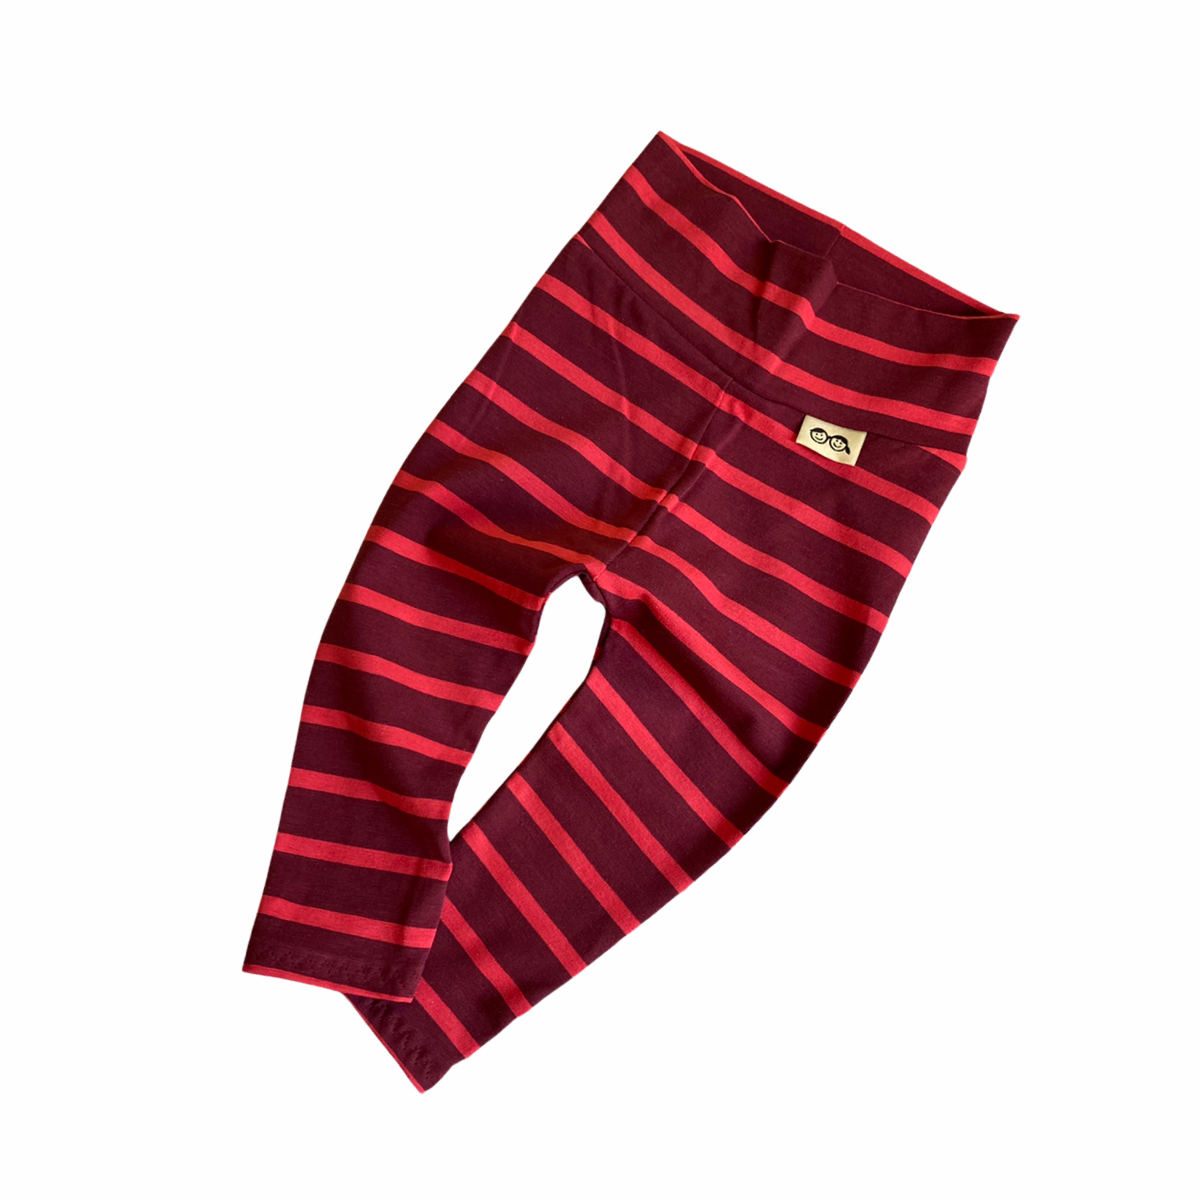 Striped Burgundy Red Leggings and/or Headbands